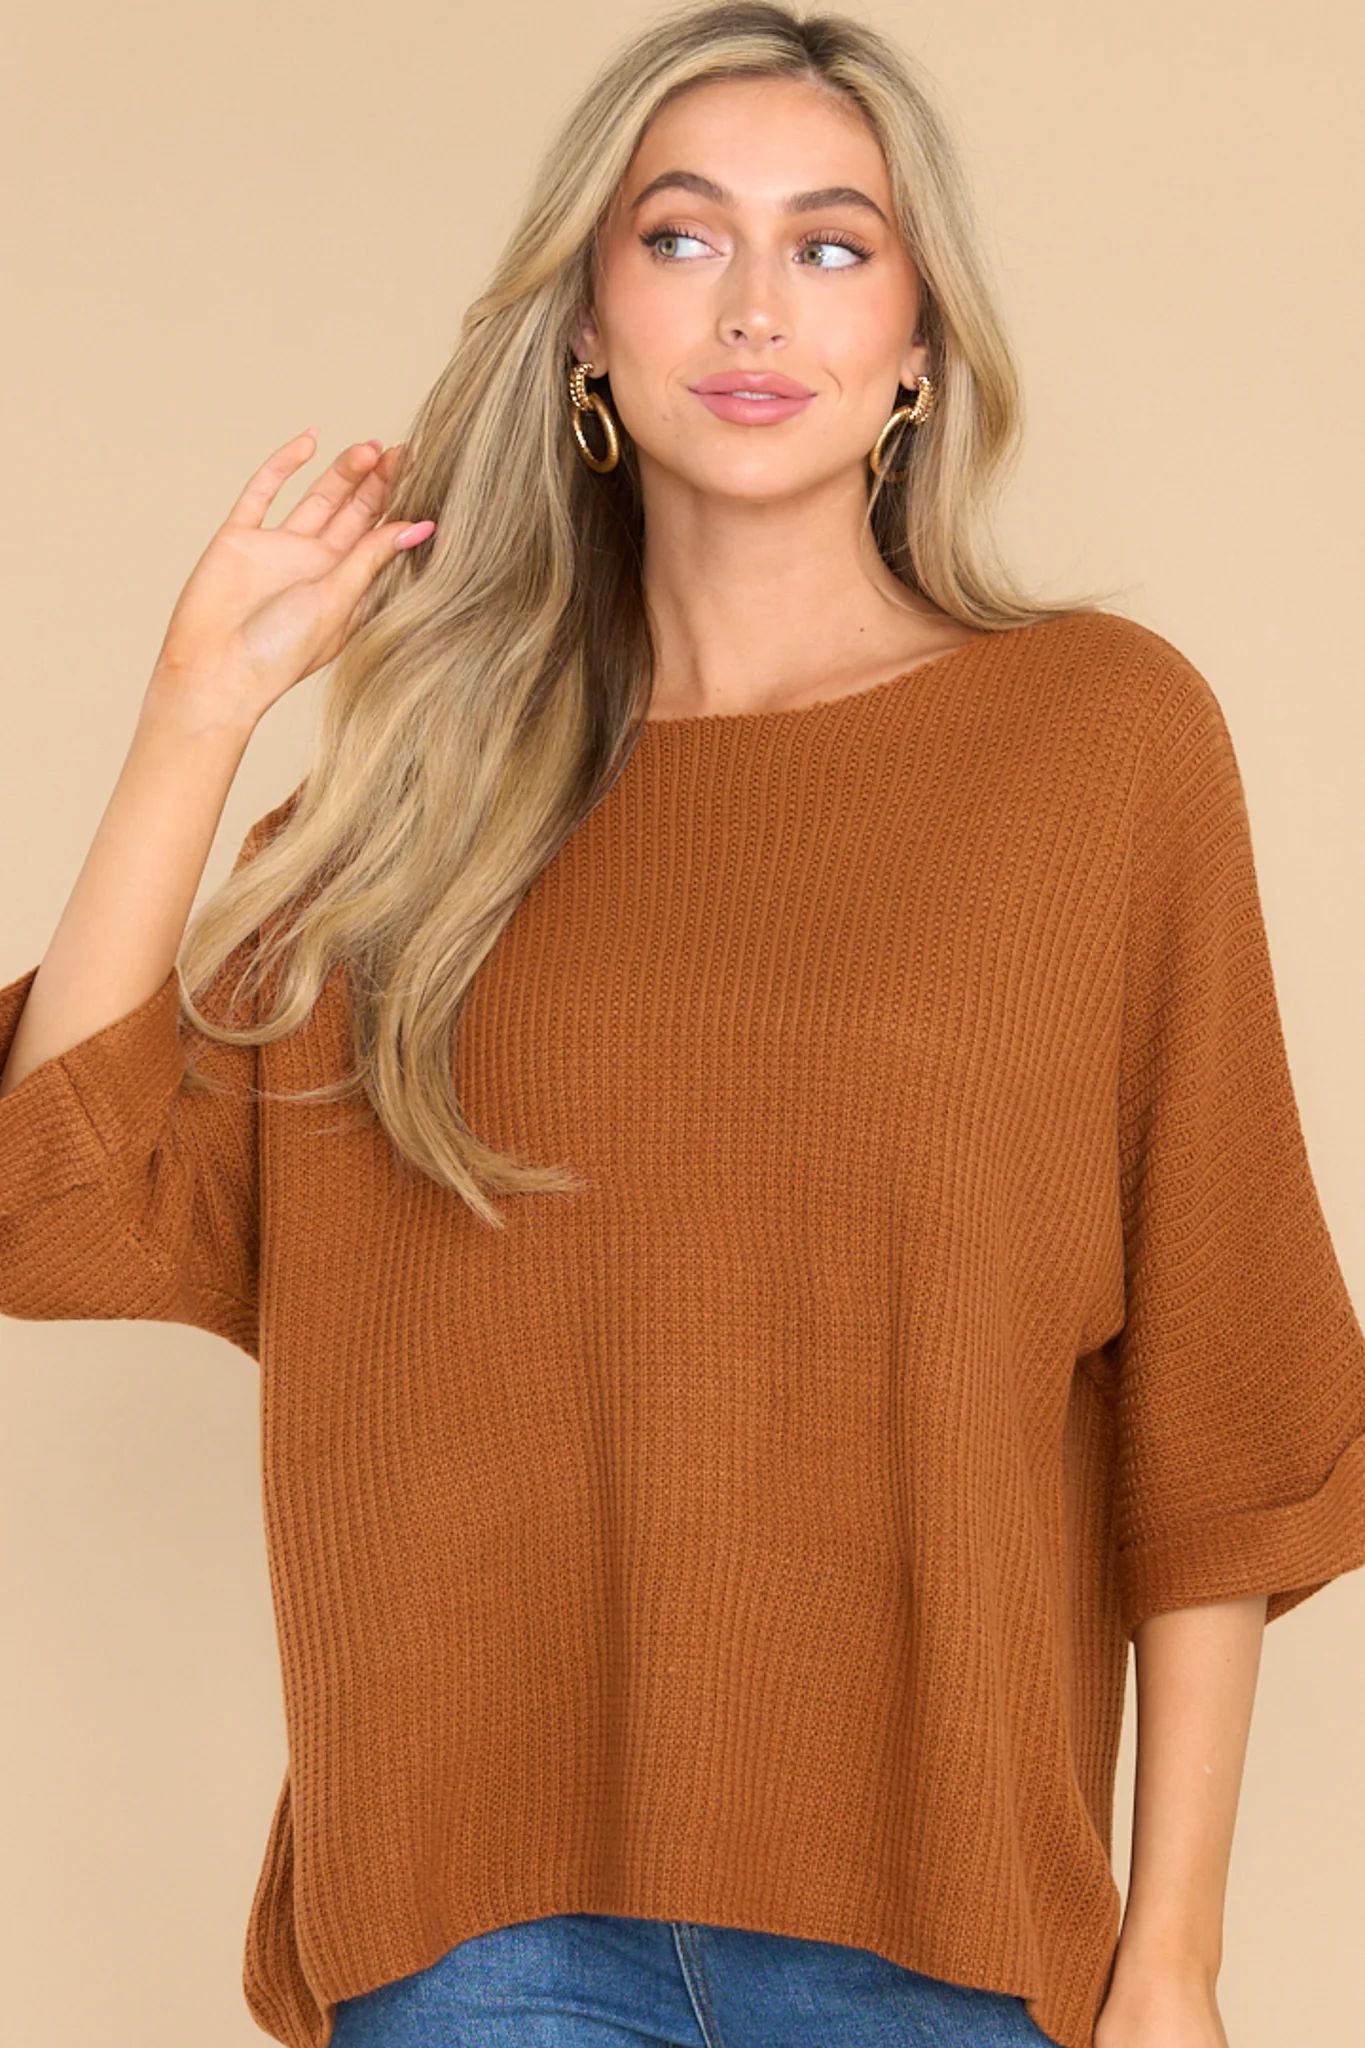 Totally Trendy Caramel Top | Red Dress 